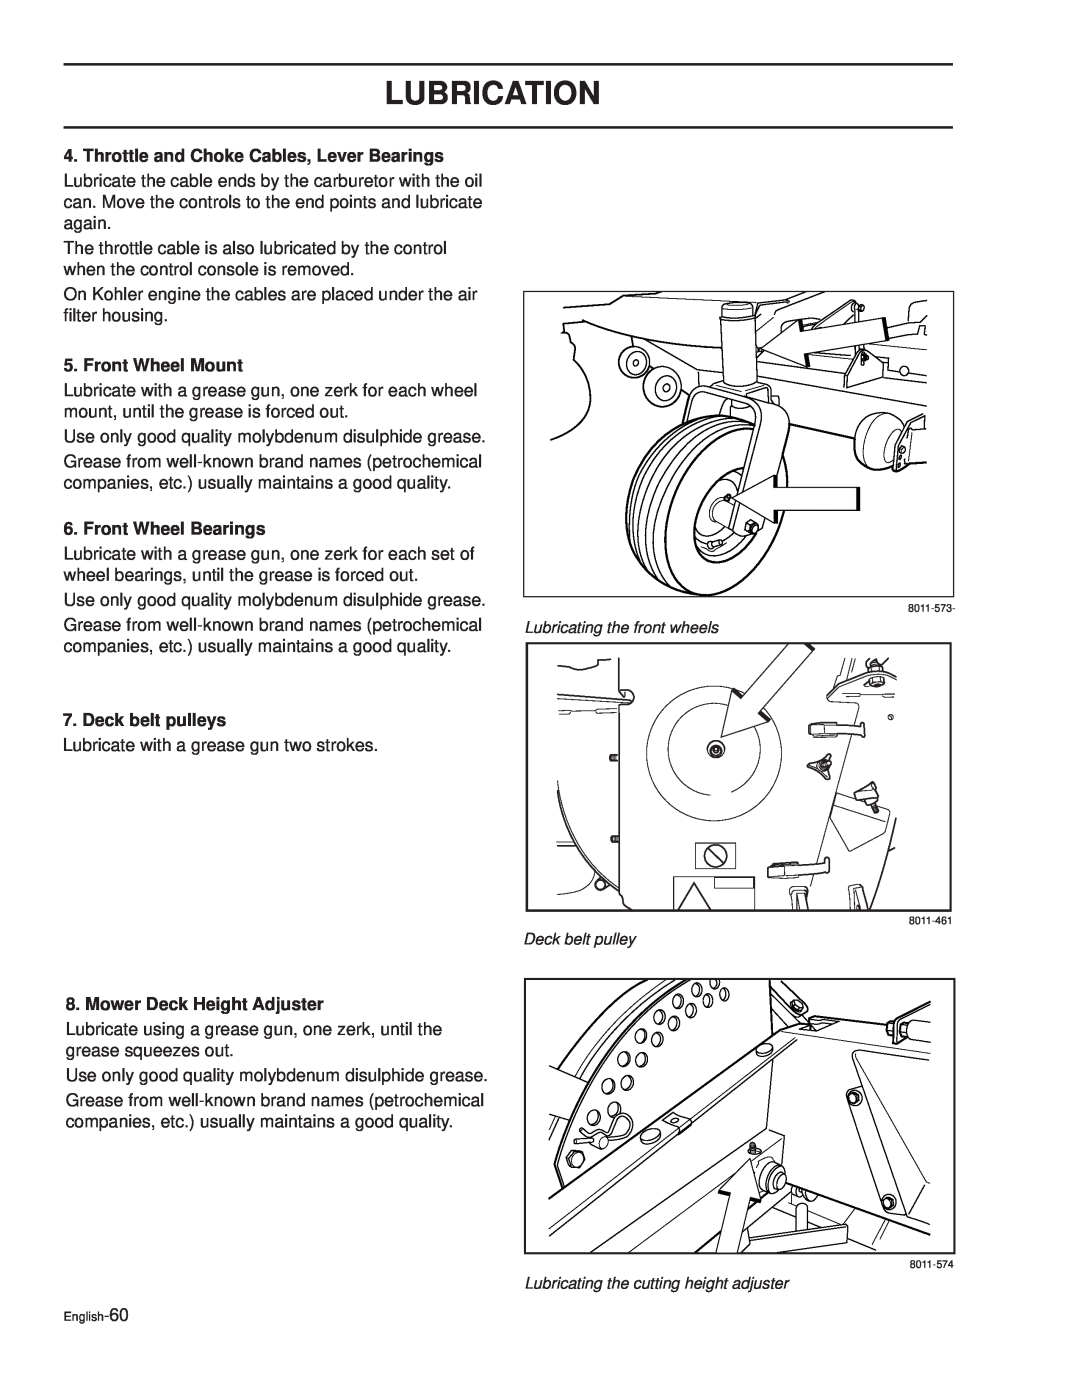 Dixon GRIZZLY 60 Throttle and Choke Cables, Lever Bearings, Front Wheel Mount, Front Wheel Bearings, Deck belt pulleys 